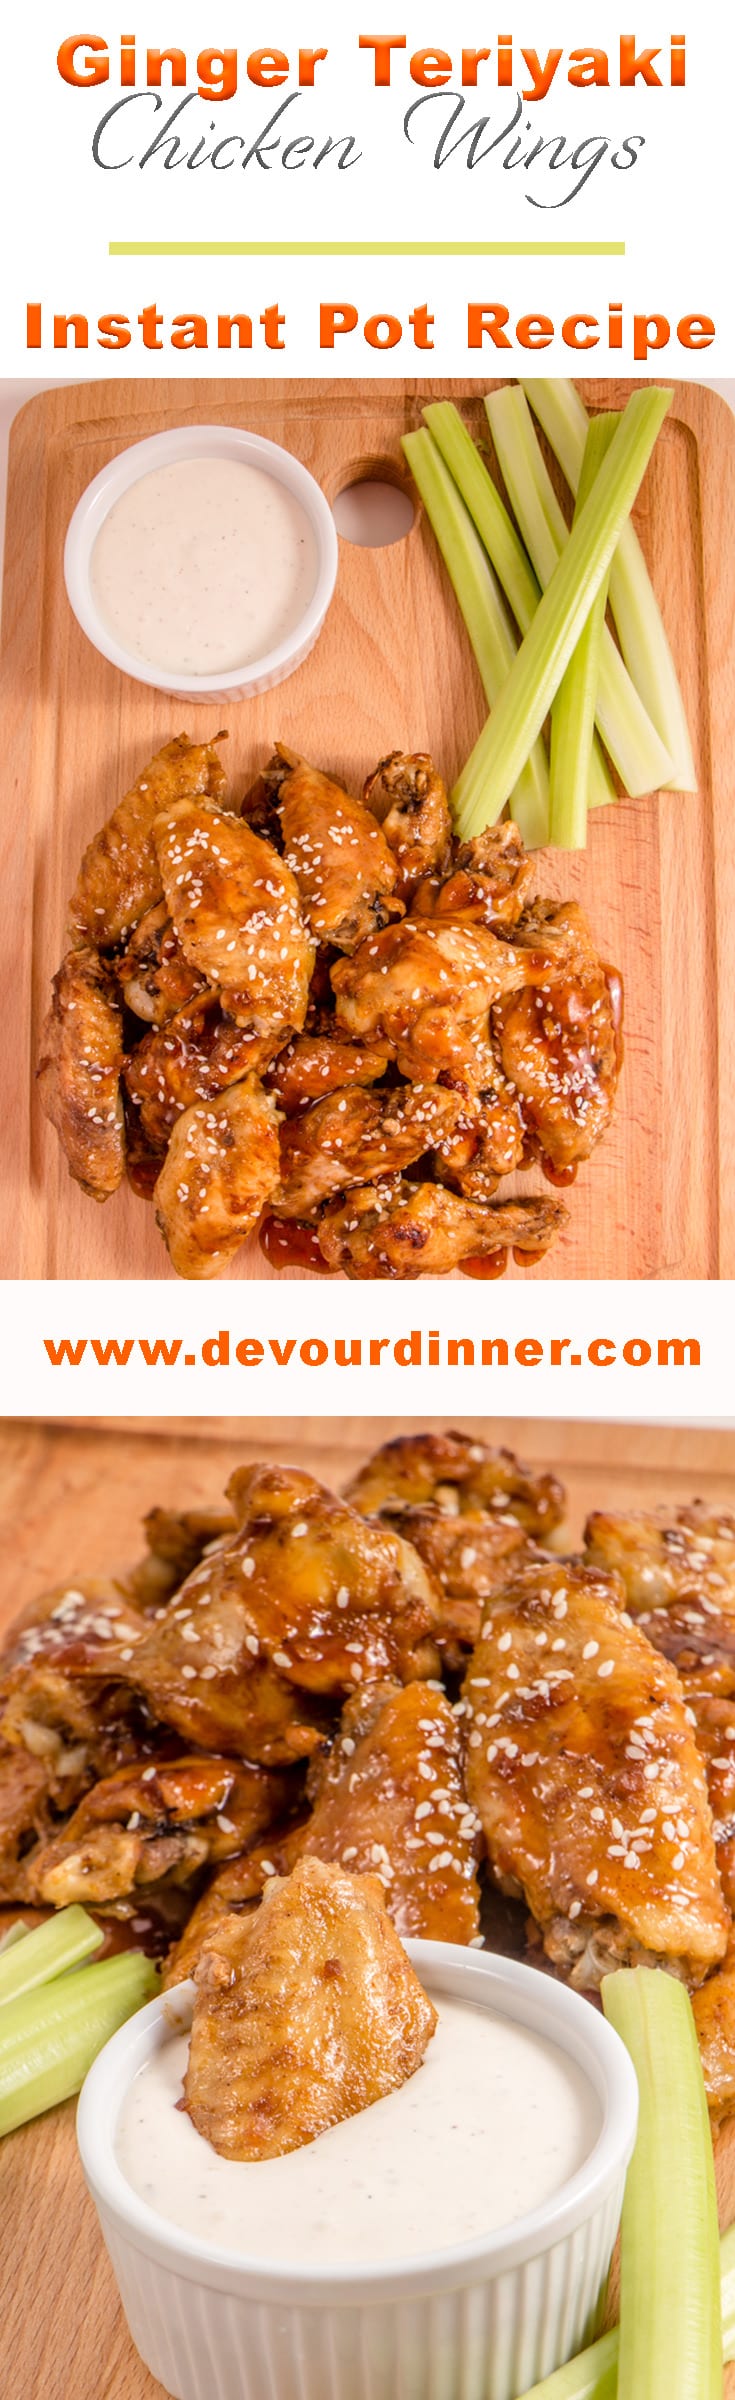 My kids ate these up! Delicious fall off the bone Chicken Wings and a savory Teriyaki Ginger Sauce from Kikkoman. Delicious! #devourdinner #recipes #recipe #food #Foodie #Foodblogger #easyrecipes #dinner #appetizer #Sidedish #dessert #yummy #chickenwings #Instantpot #Pressurecooker #Teriyaki #Kikkomanusa #kikkoman #GingerTeriyaki #Sauce #Dinner #Entree #sidedish #appetizer #football